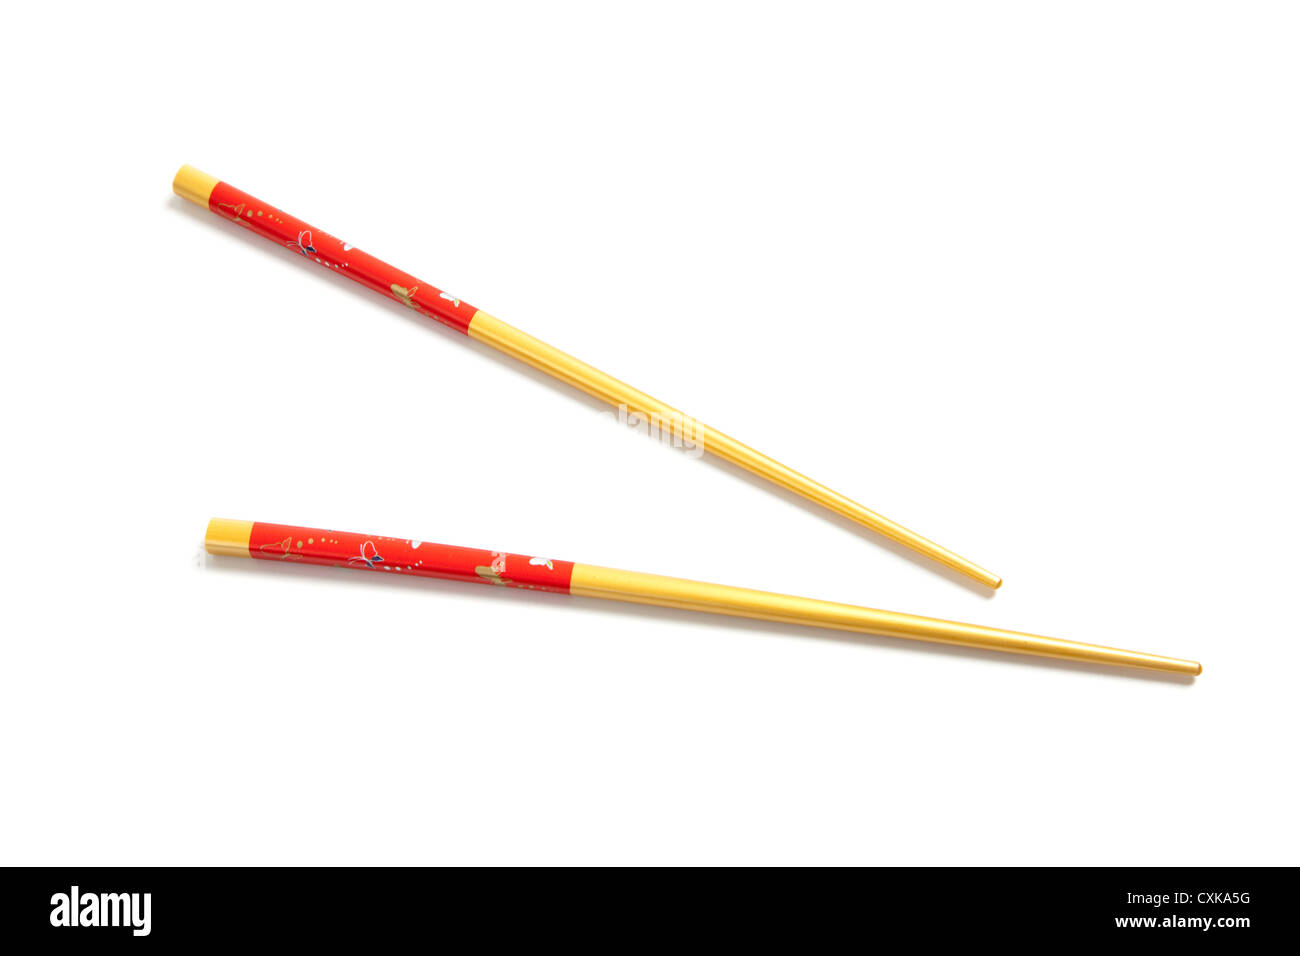 Red and yellow chopsticks on a white background Stock Photo